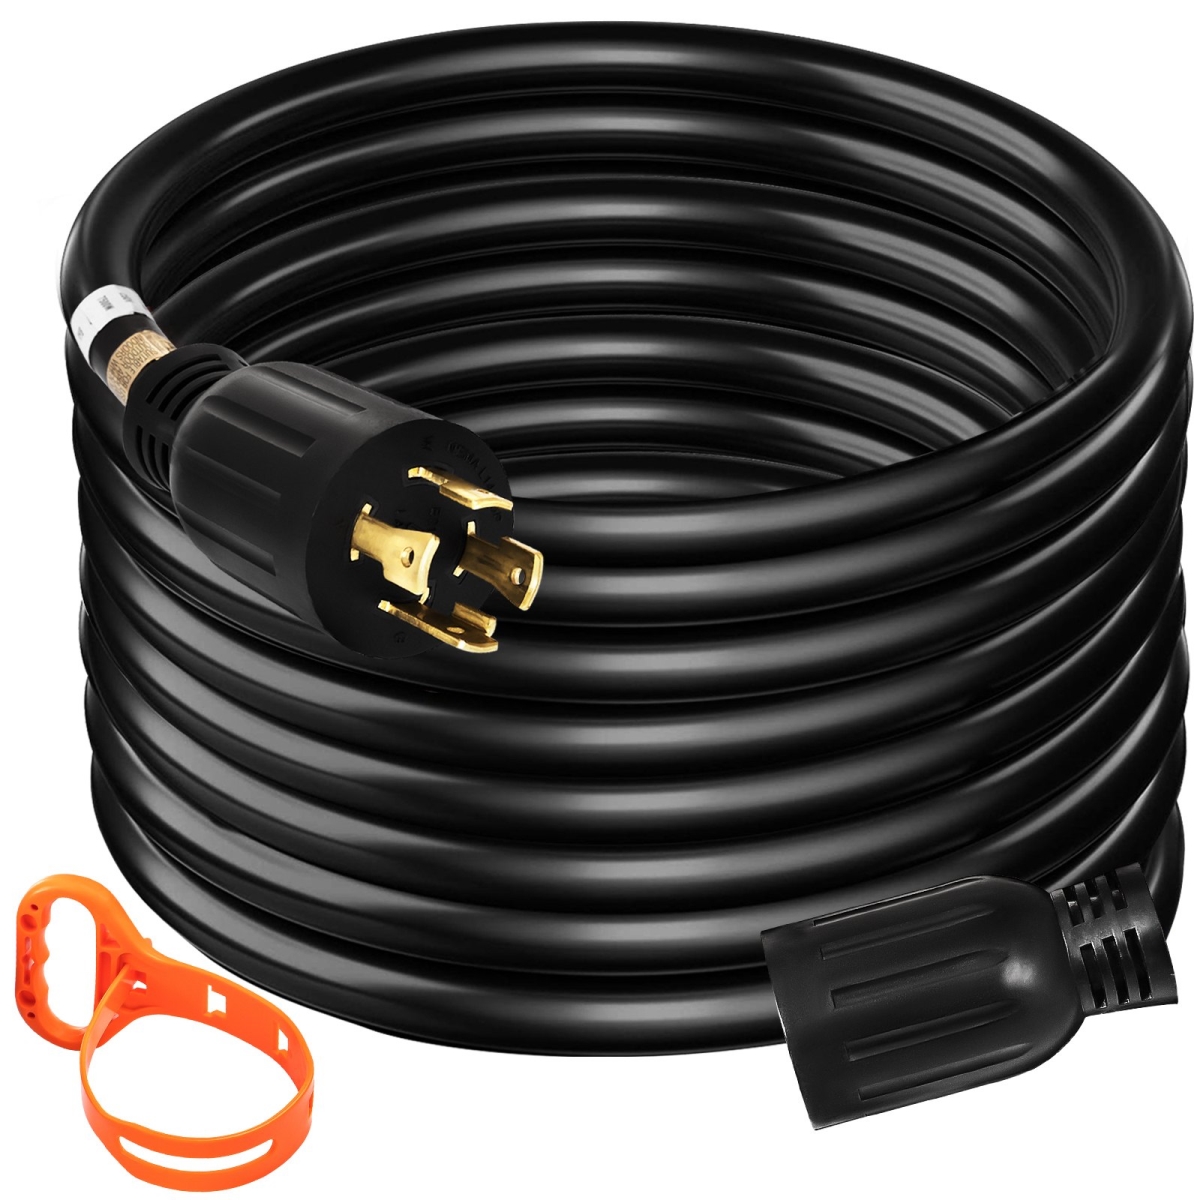 Picture of Vevor FDJYCX40FT30A0001V1 40F ft. 30A Generator Extension Cord 4 Wire 10 Gauge Generator Cord 125-250V Generator Power Cord Twist Lock Connectors